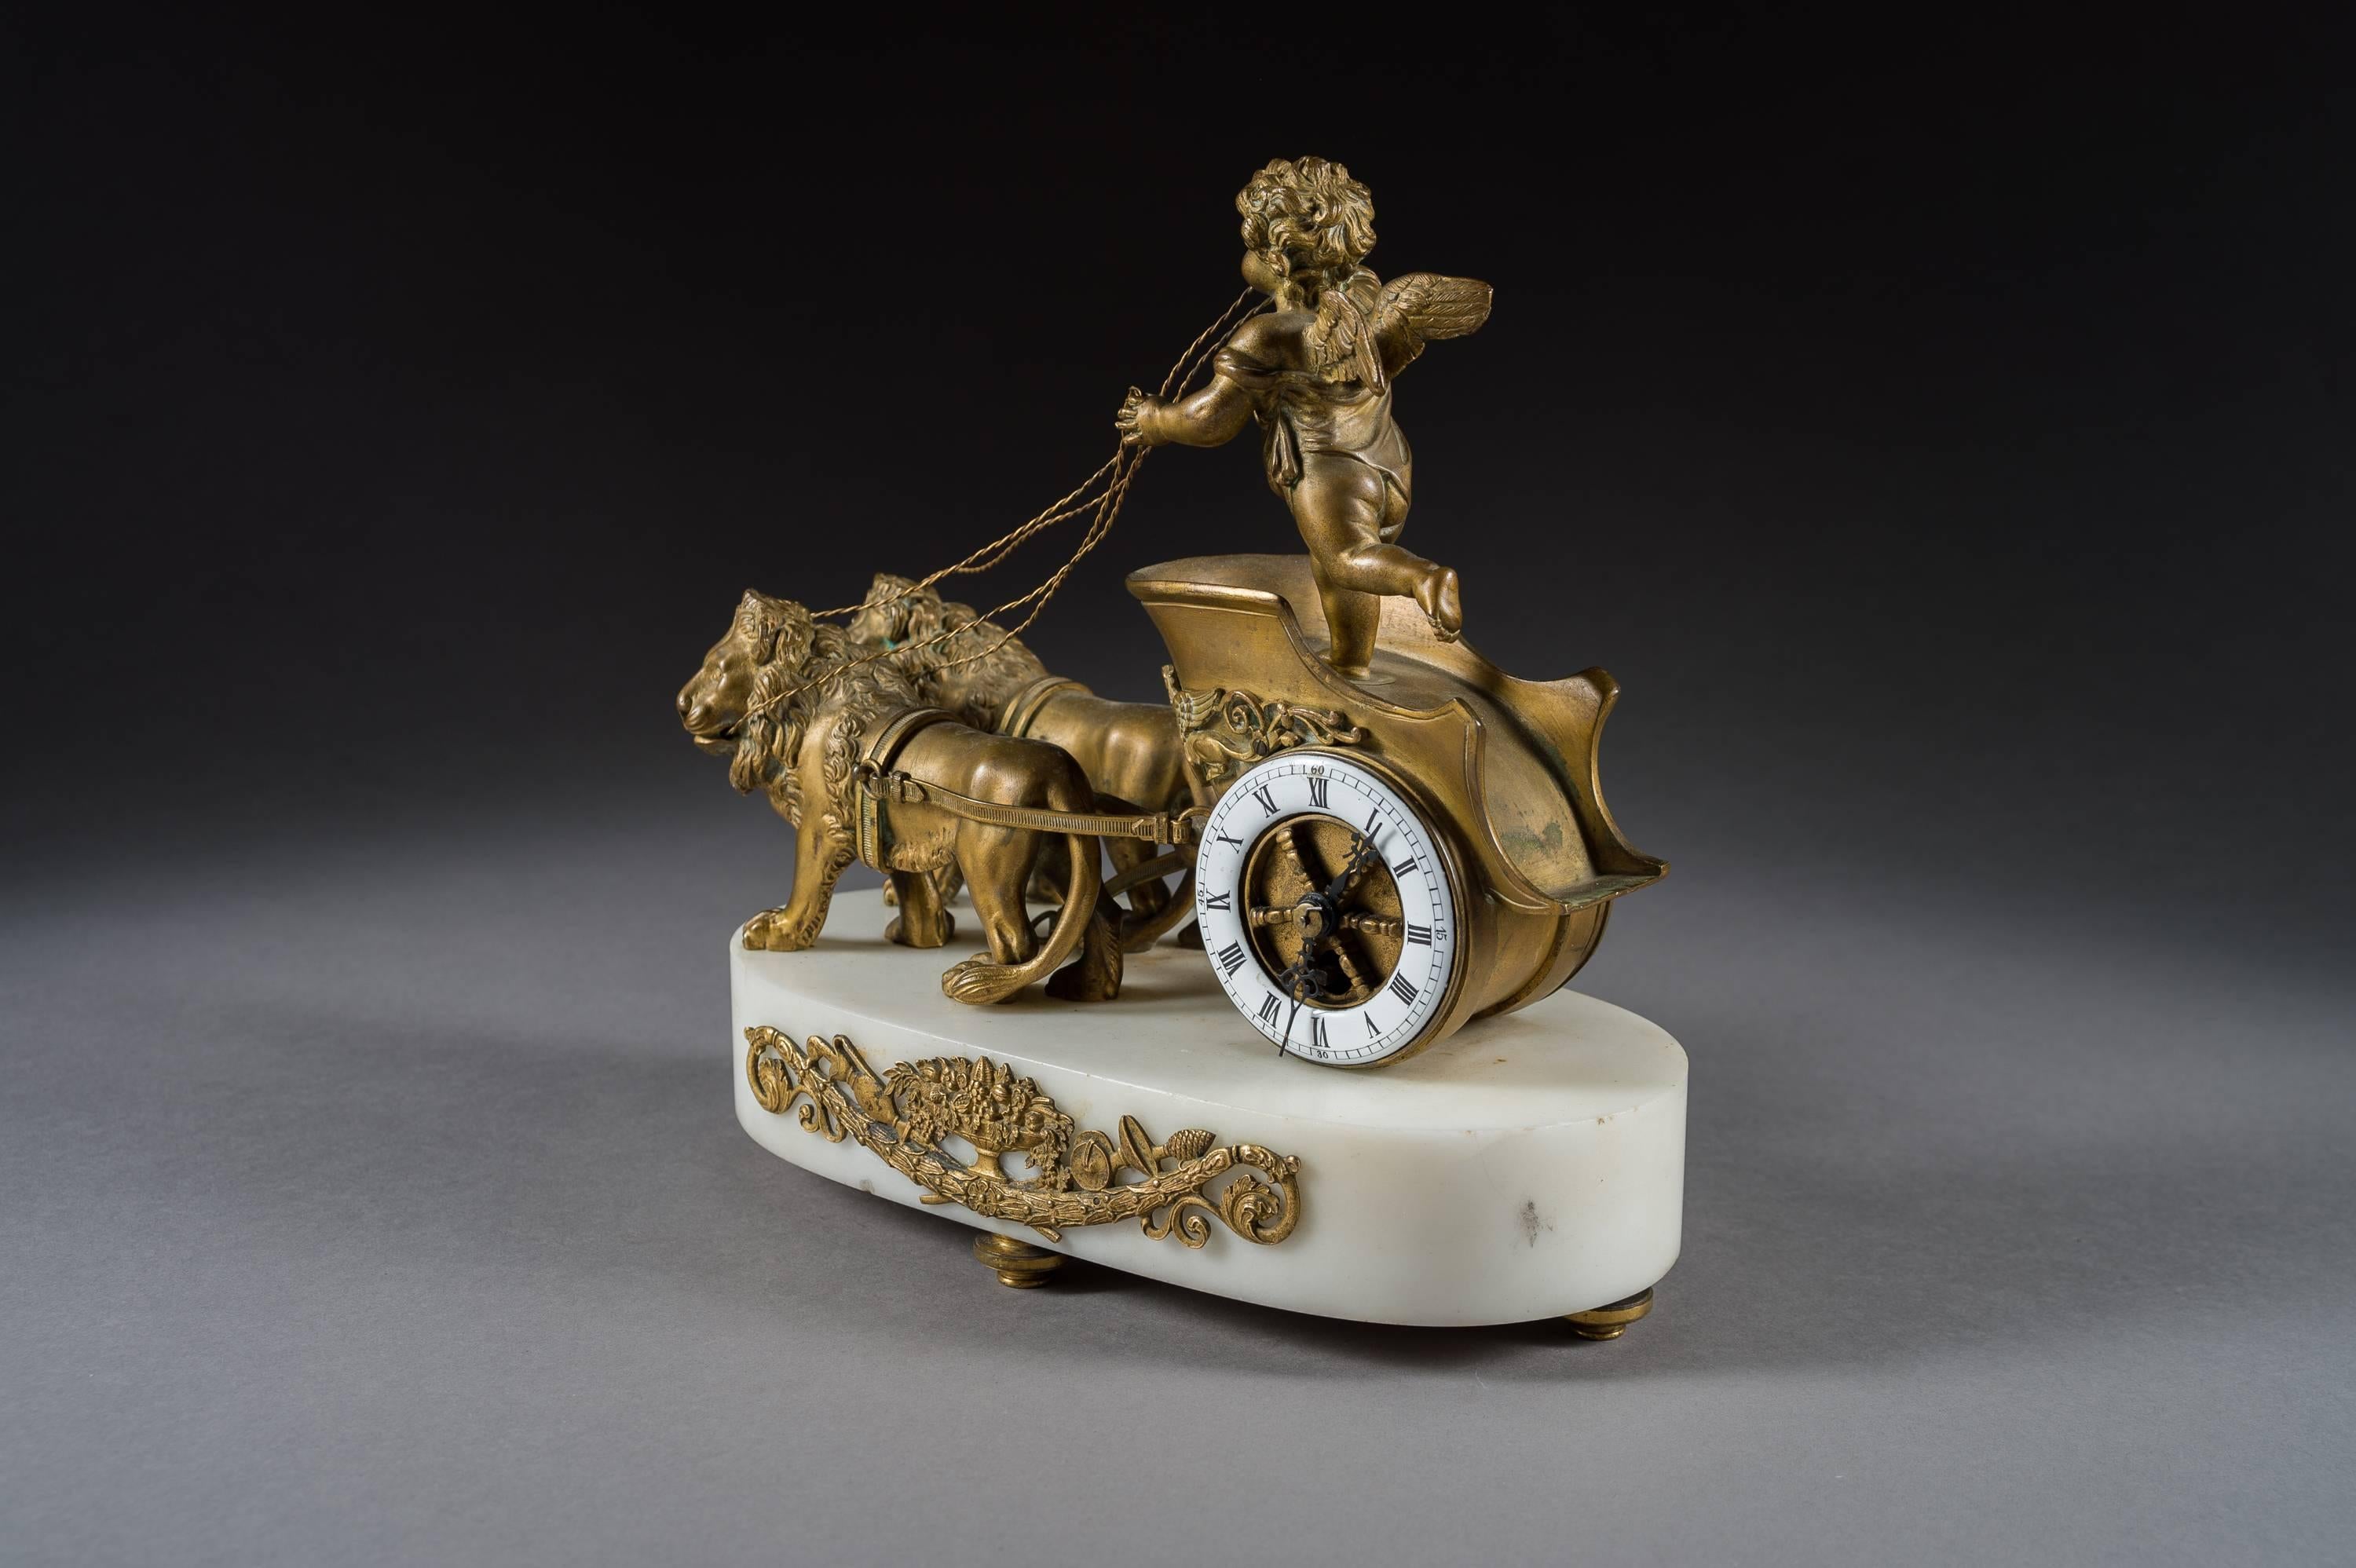 19th century French gilt bronze and marble desk clock 

France, circa 1890.

Decorated with a standing bronze putti on a chariot with two lions, on a white marble base with attached ormolu mounts under a white enamel dial with roman